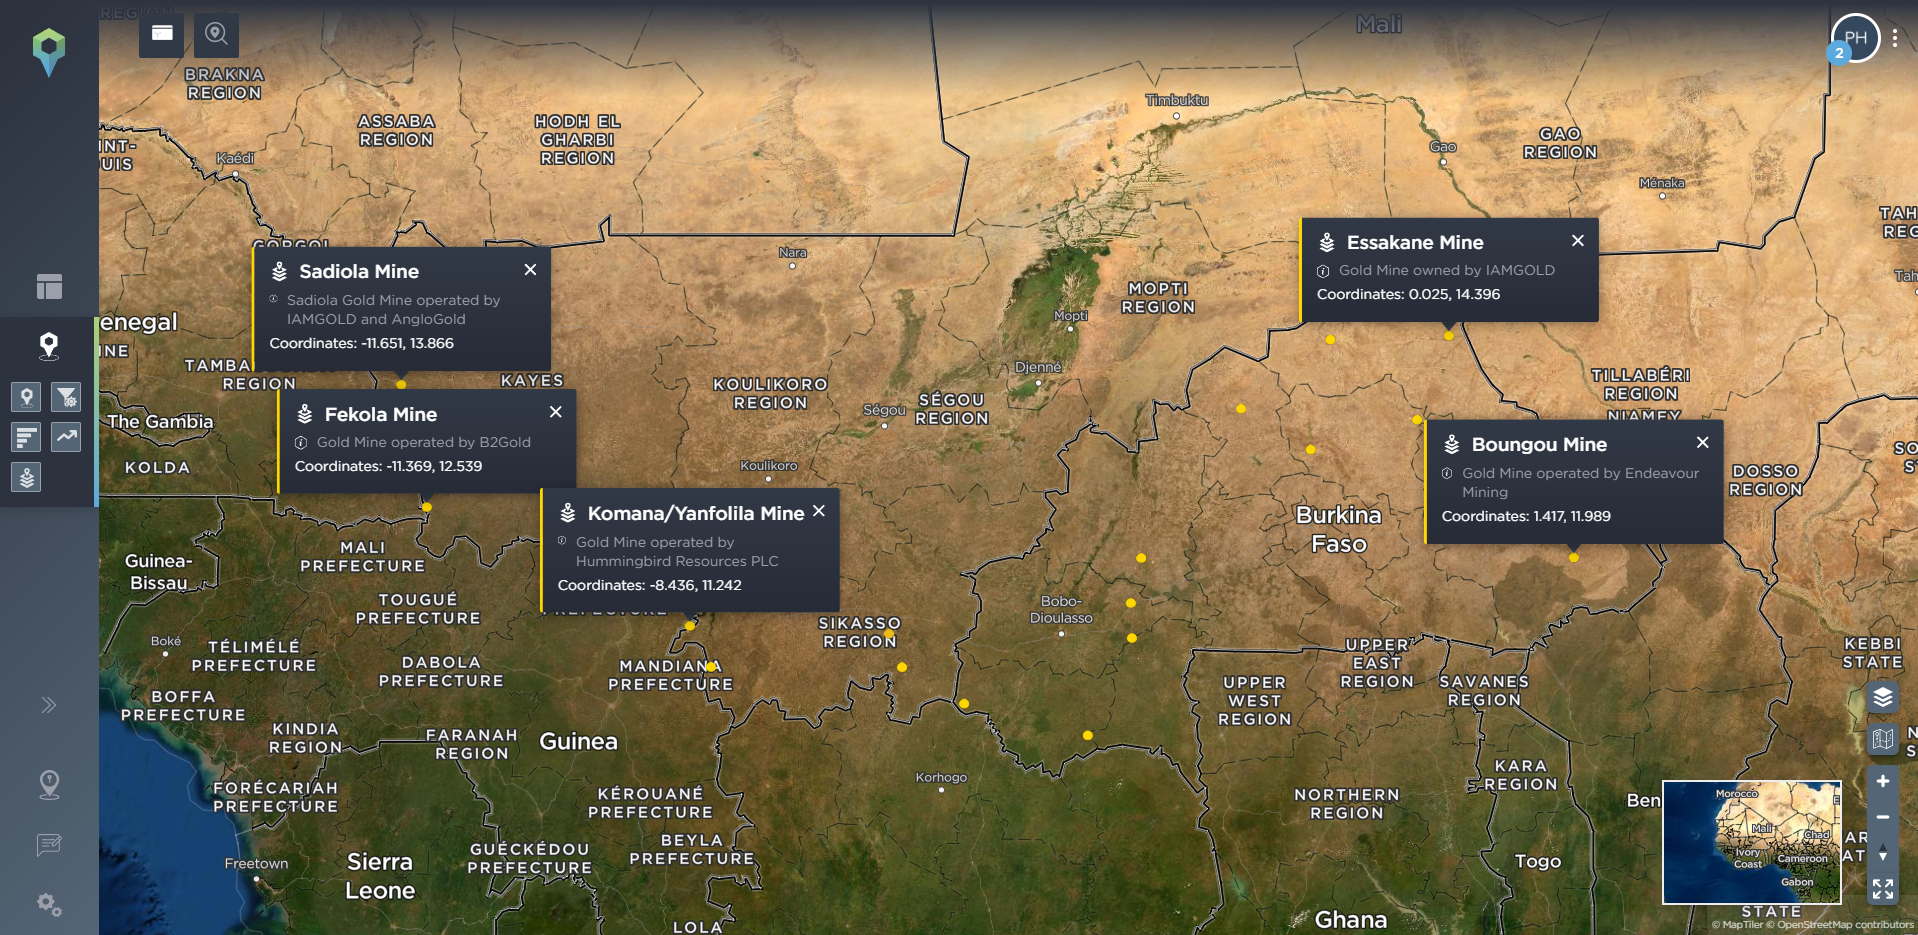 asset protection tracking armed conflict near areas of operation for businesses using threat intelligence software